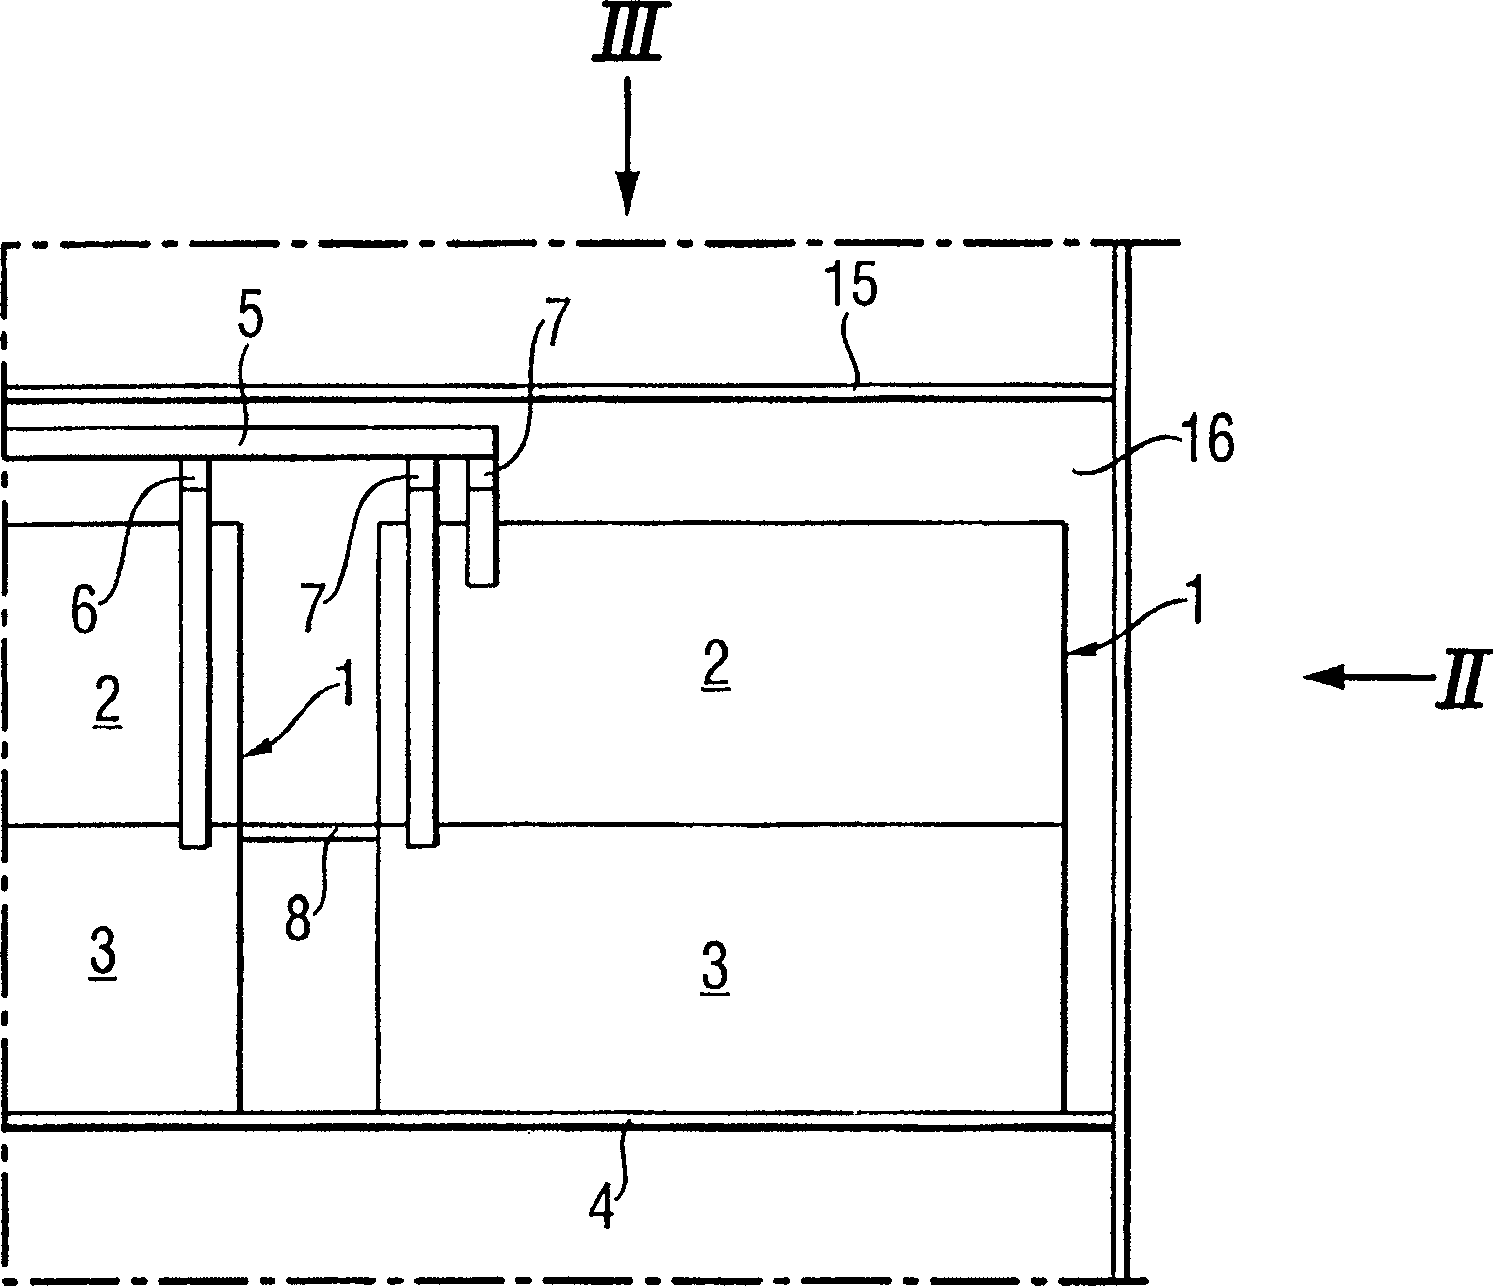 Method and system of installing and connecting prefabricated room units to a ship or other watercraft